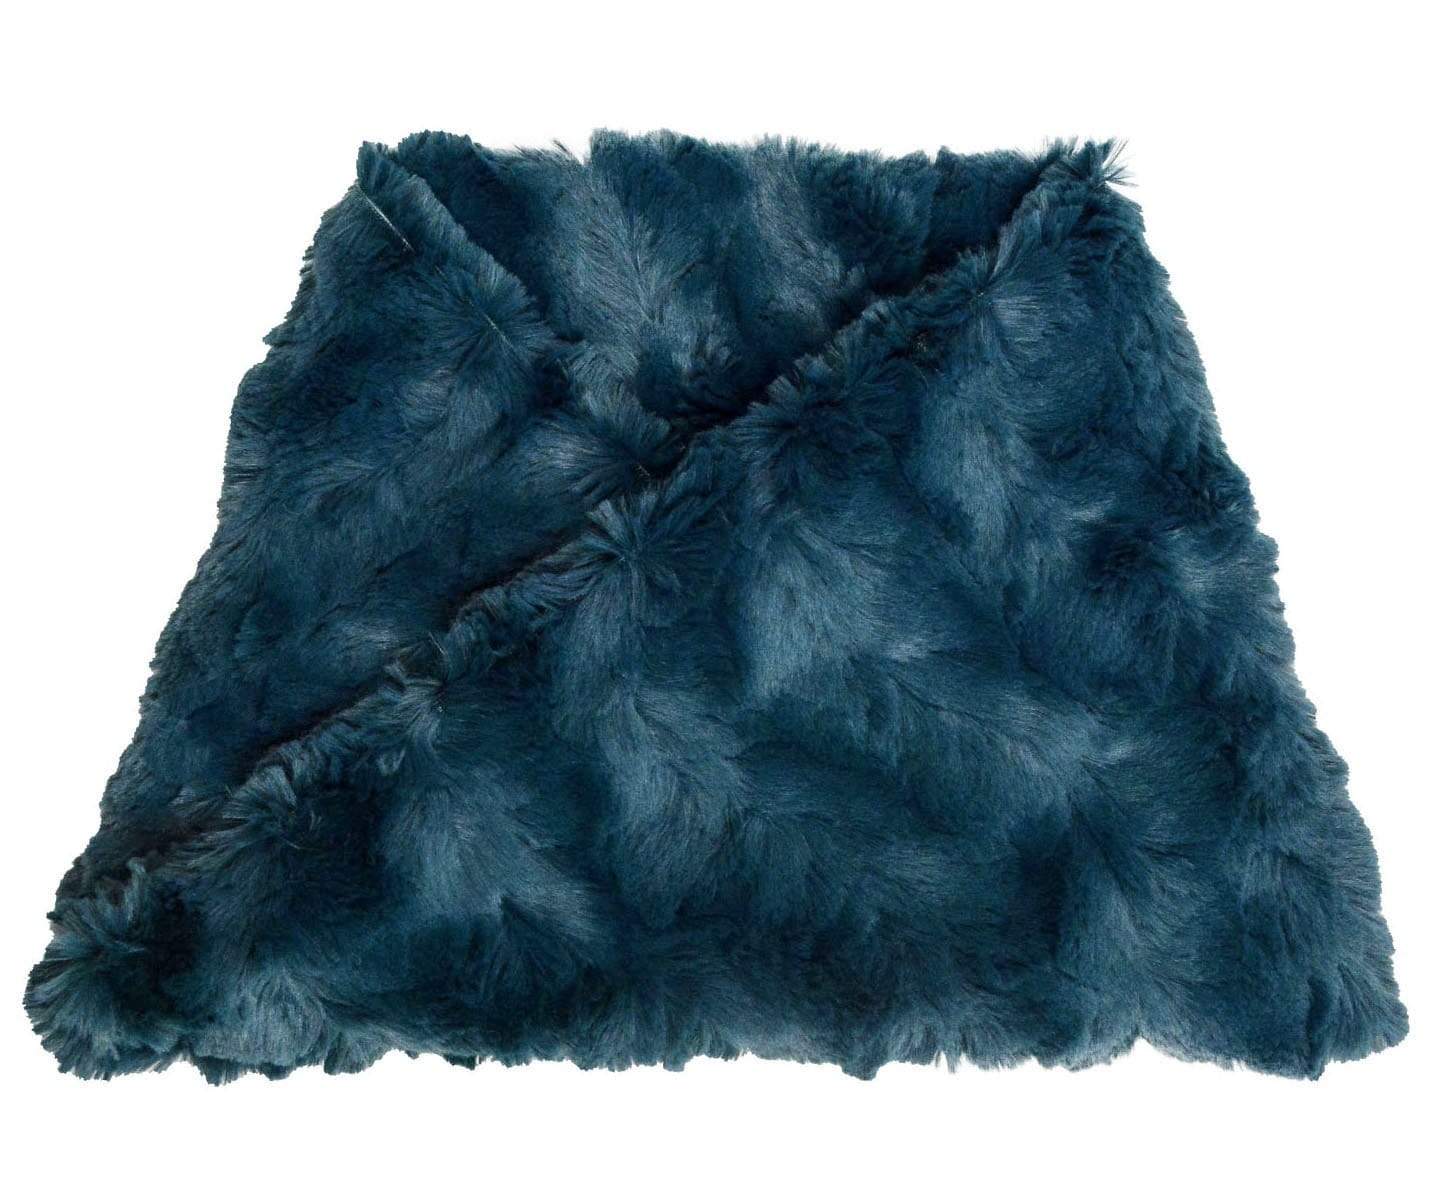  Neck Warmer | Peacock Pond Teal Faux Fur | Handmade in the USA by Pandemonium Seattle